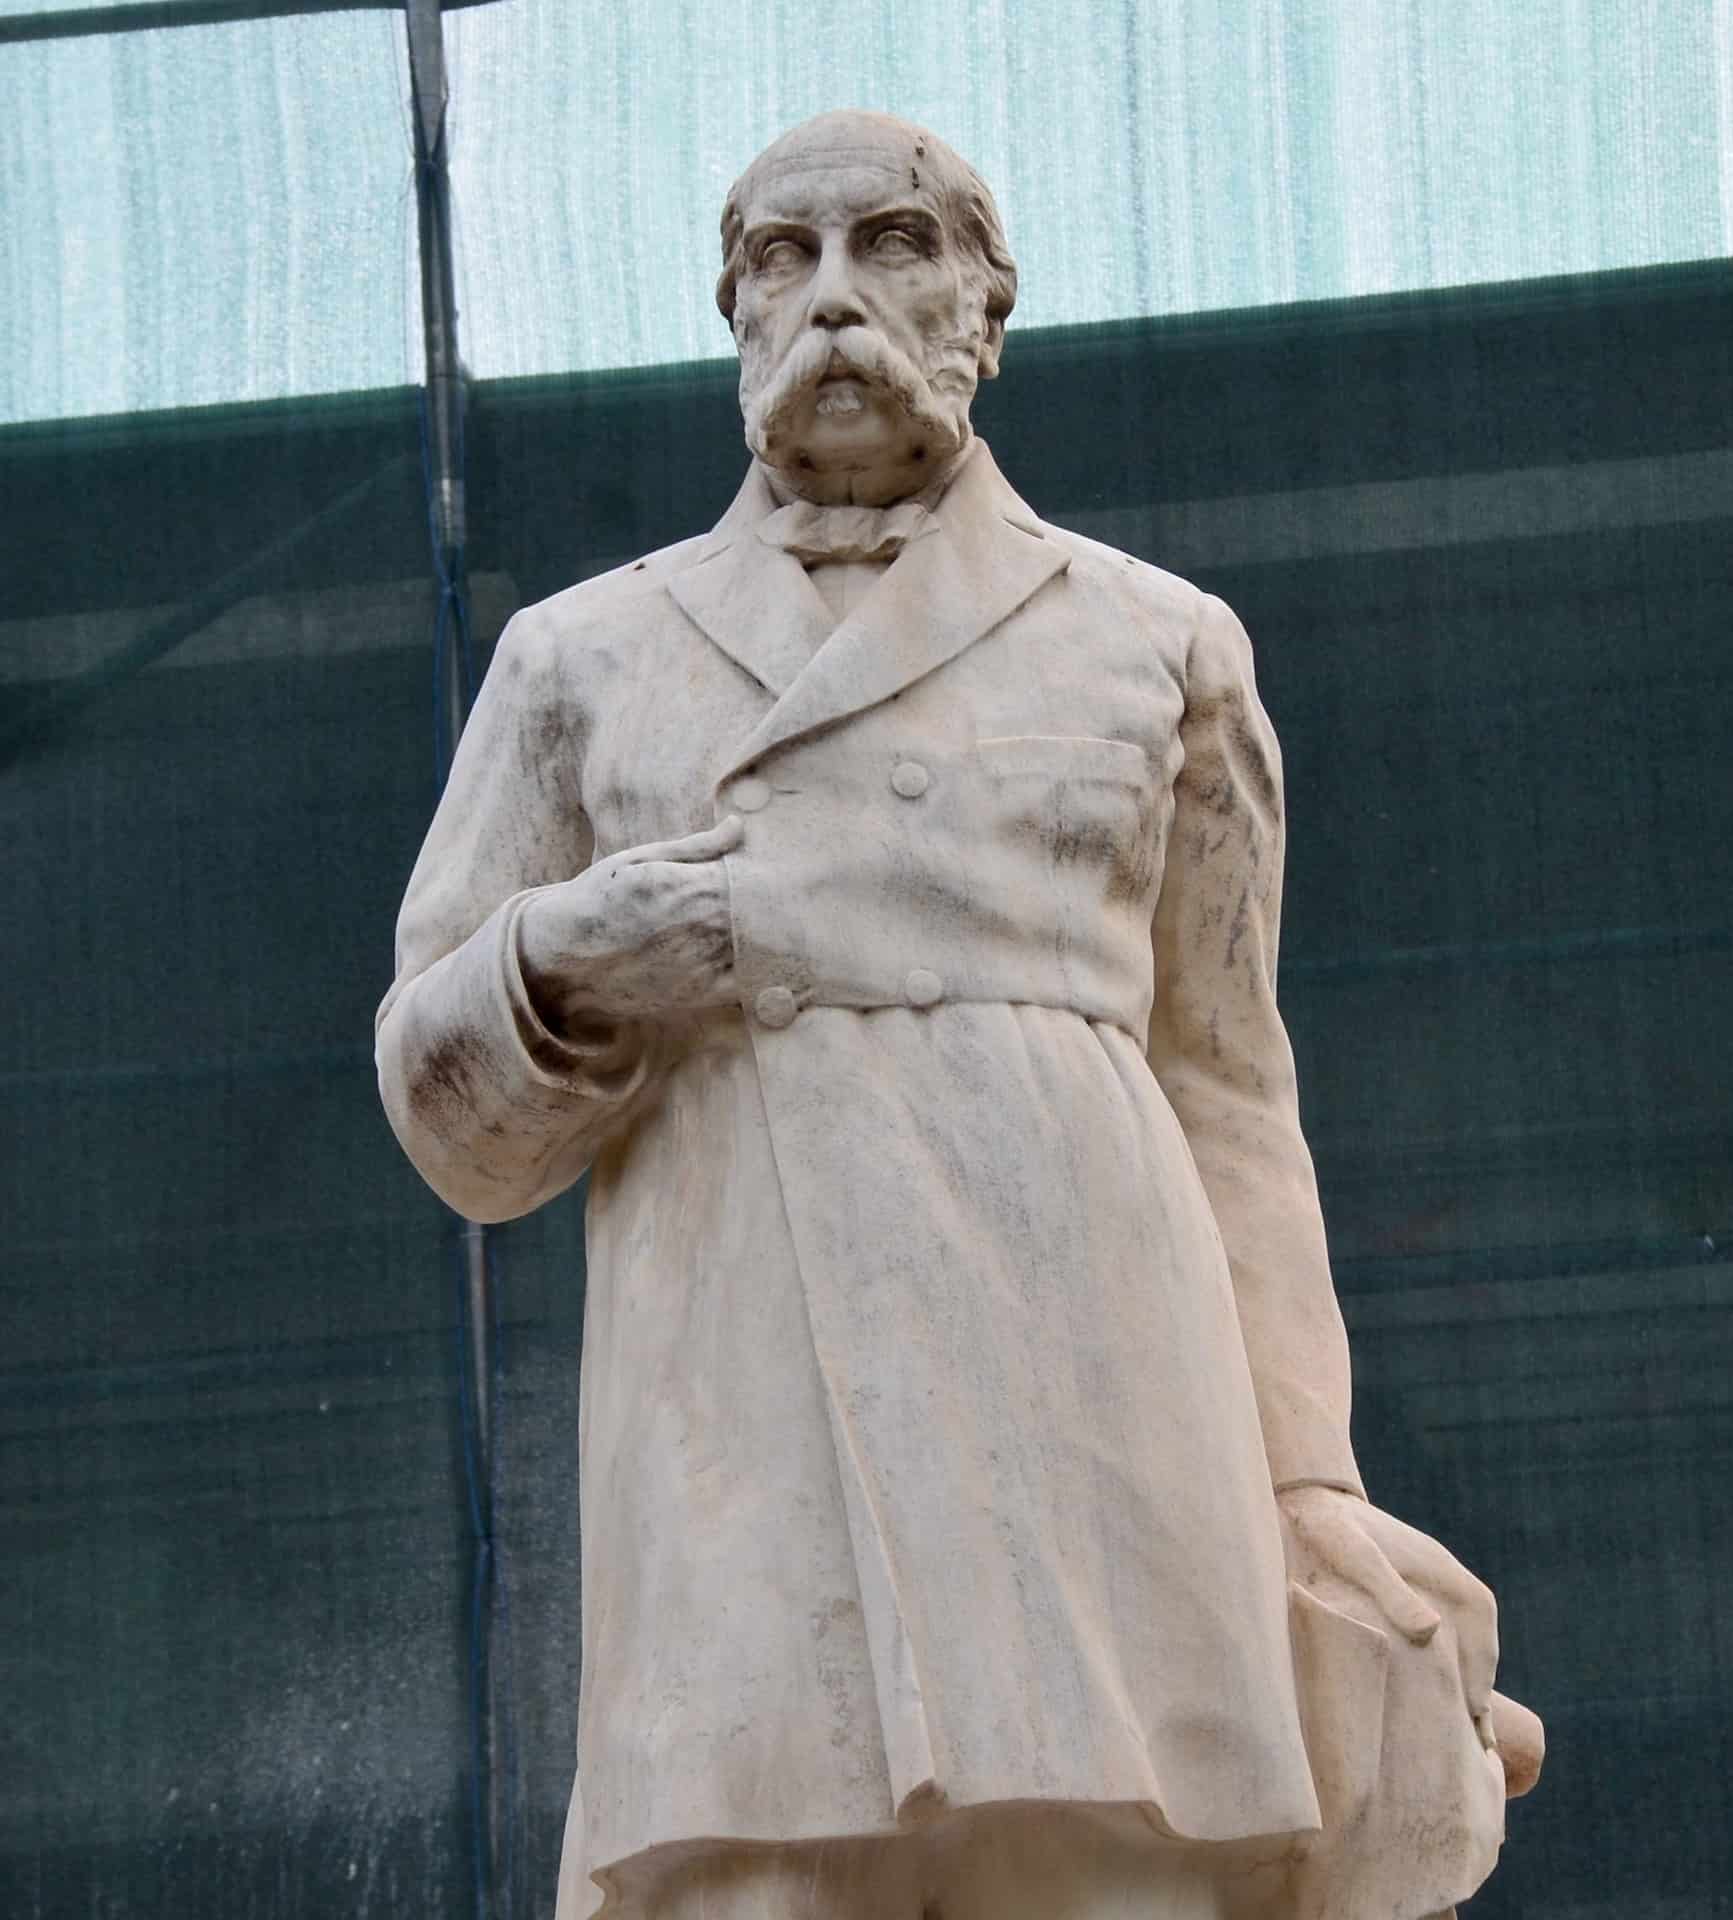 Statue of Theodoros Diligiannis at the Old Parliament House (National Historical Museum) in Athens, Greece